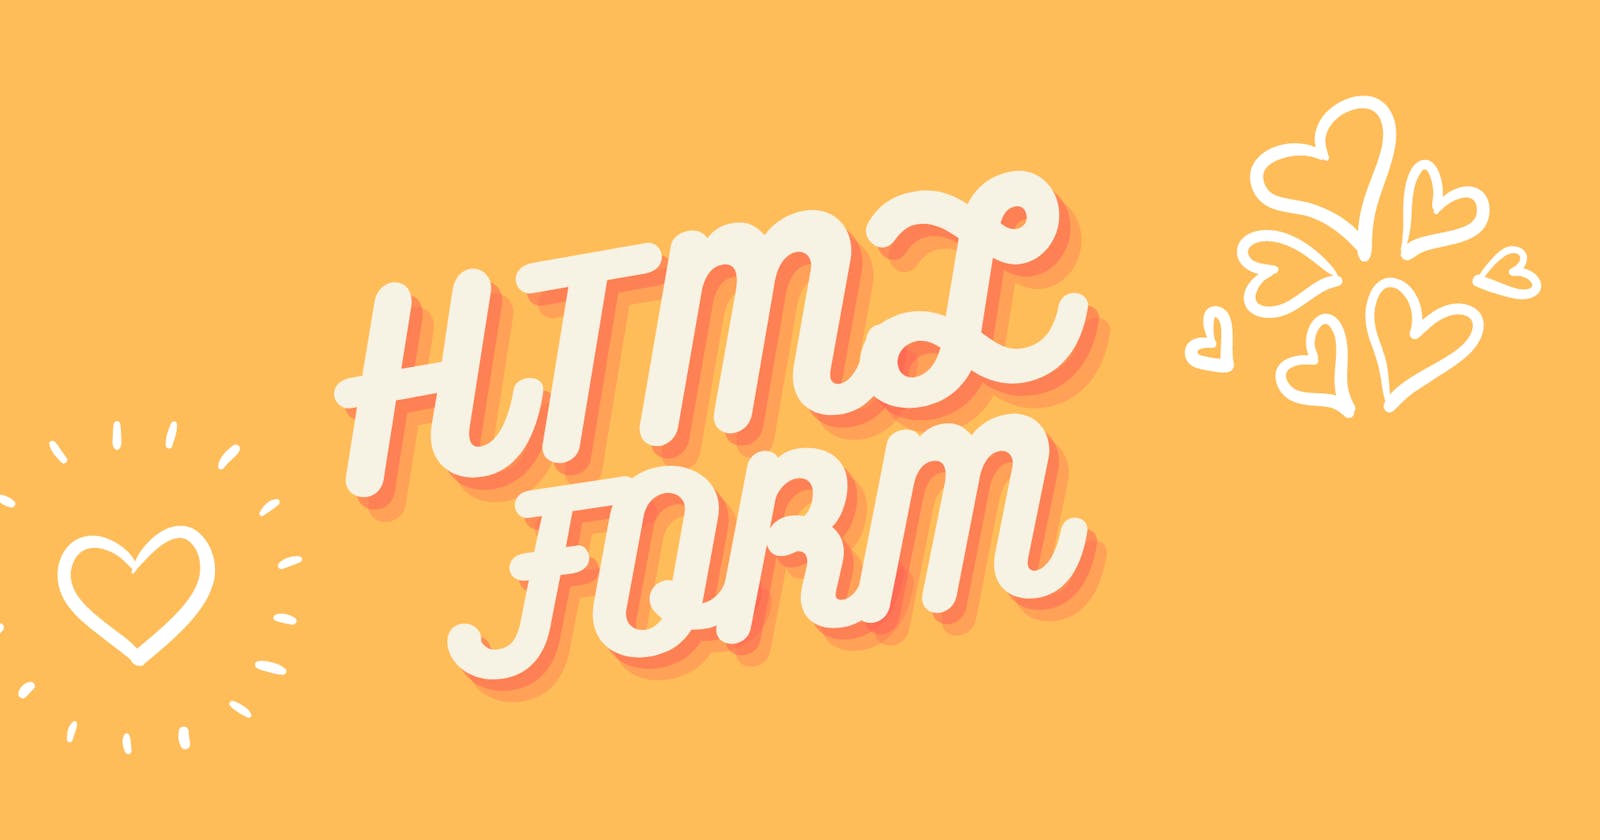 How To Create A Simple HTML Form.